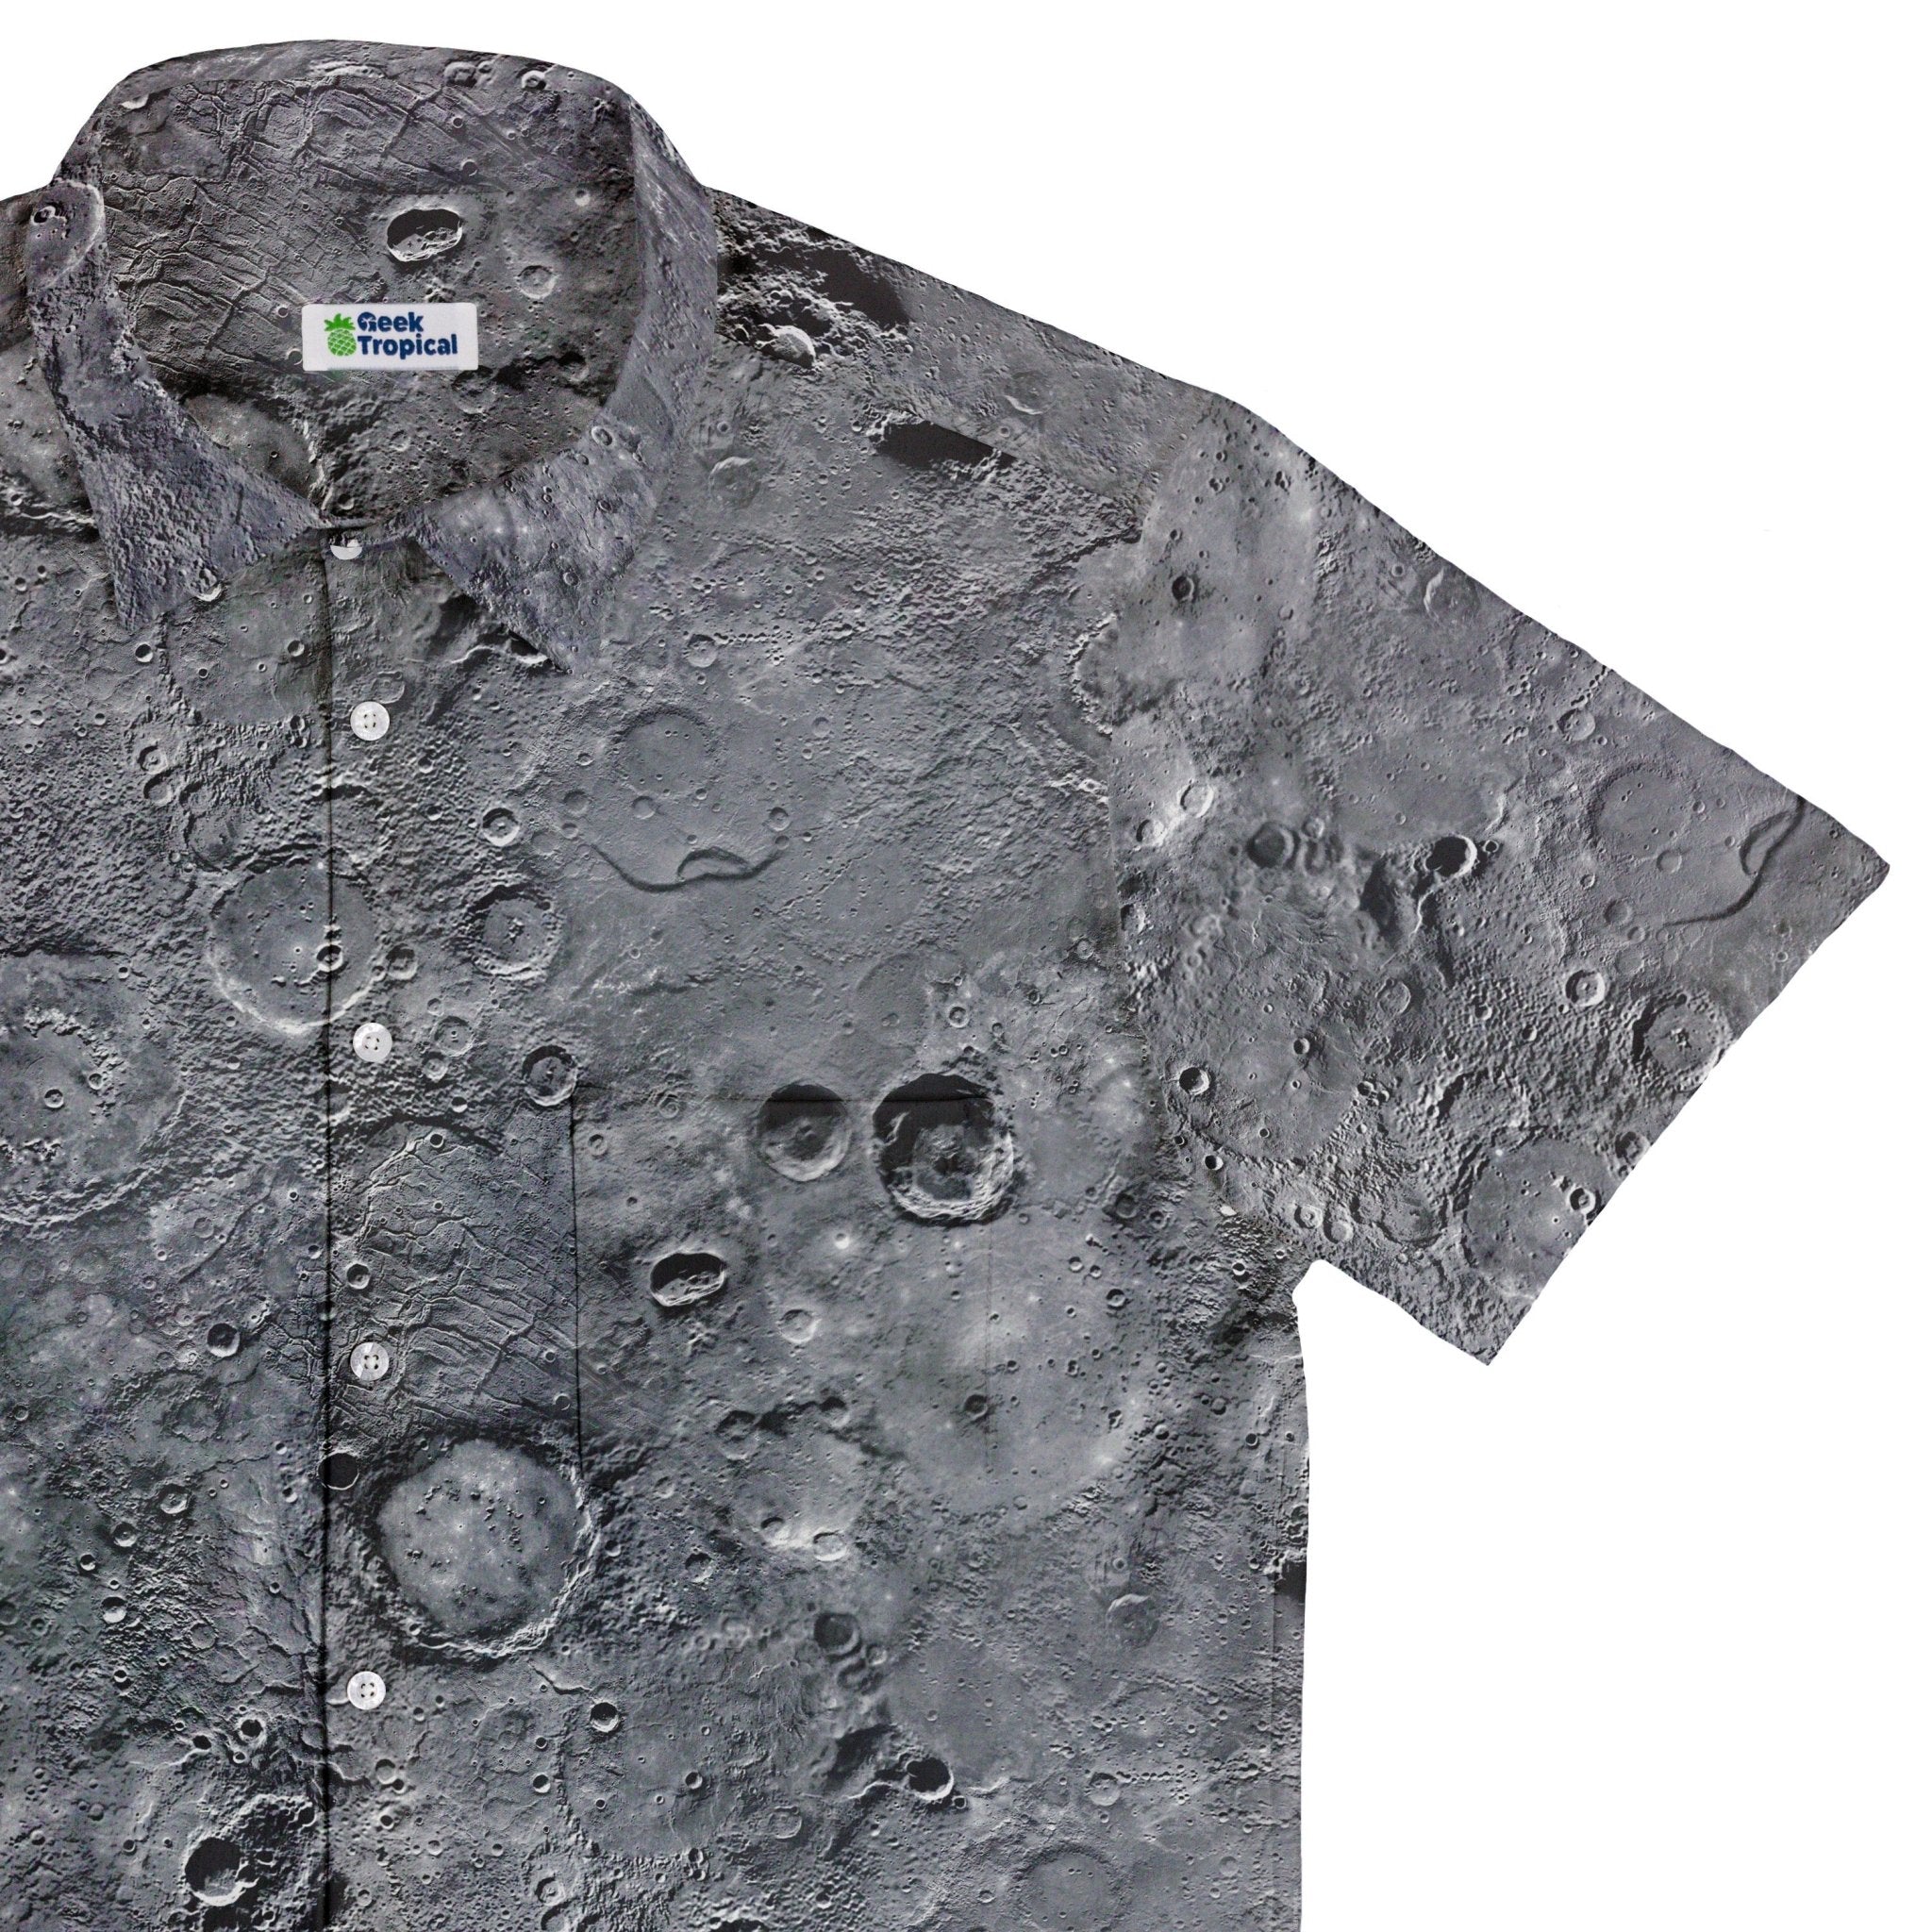 Surface of Mercury Button Up Shirt - adult sizing - Designs by Nathan - science print